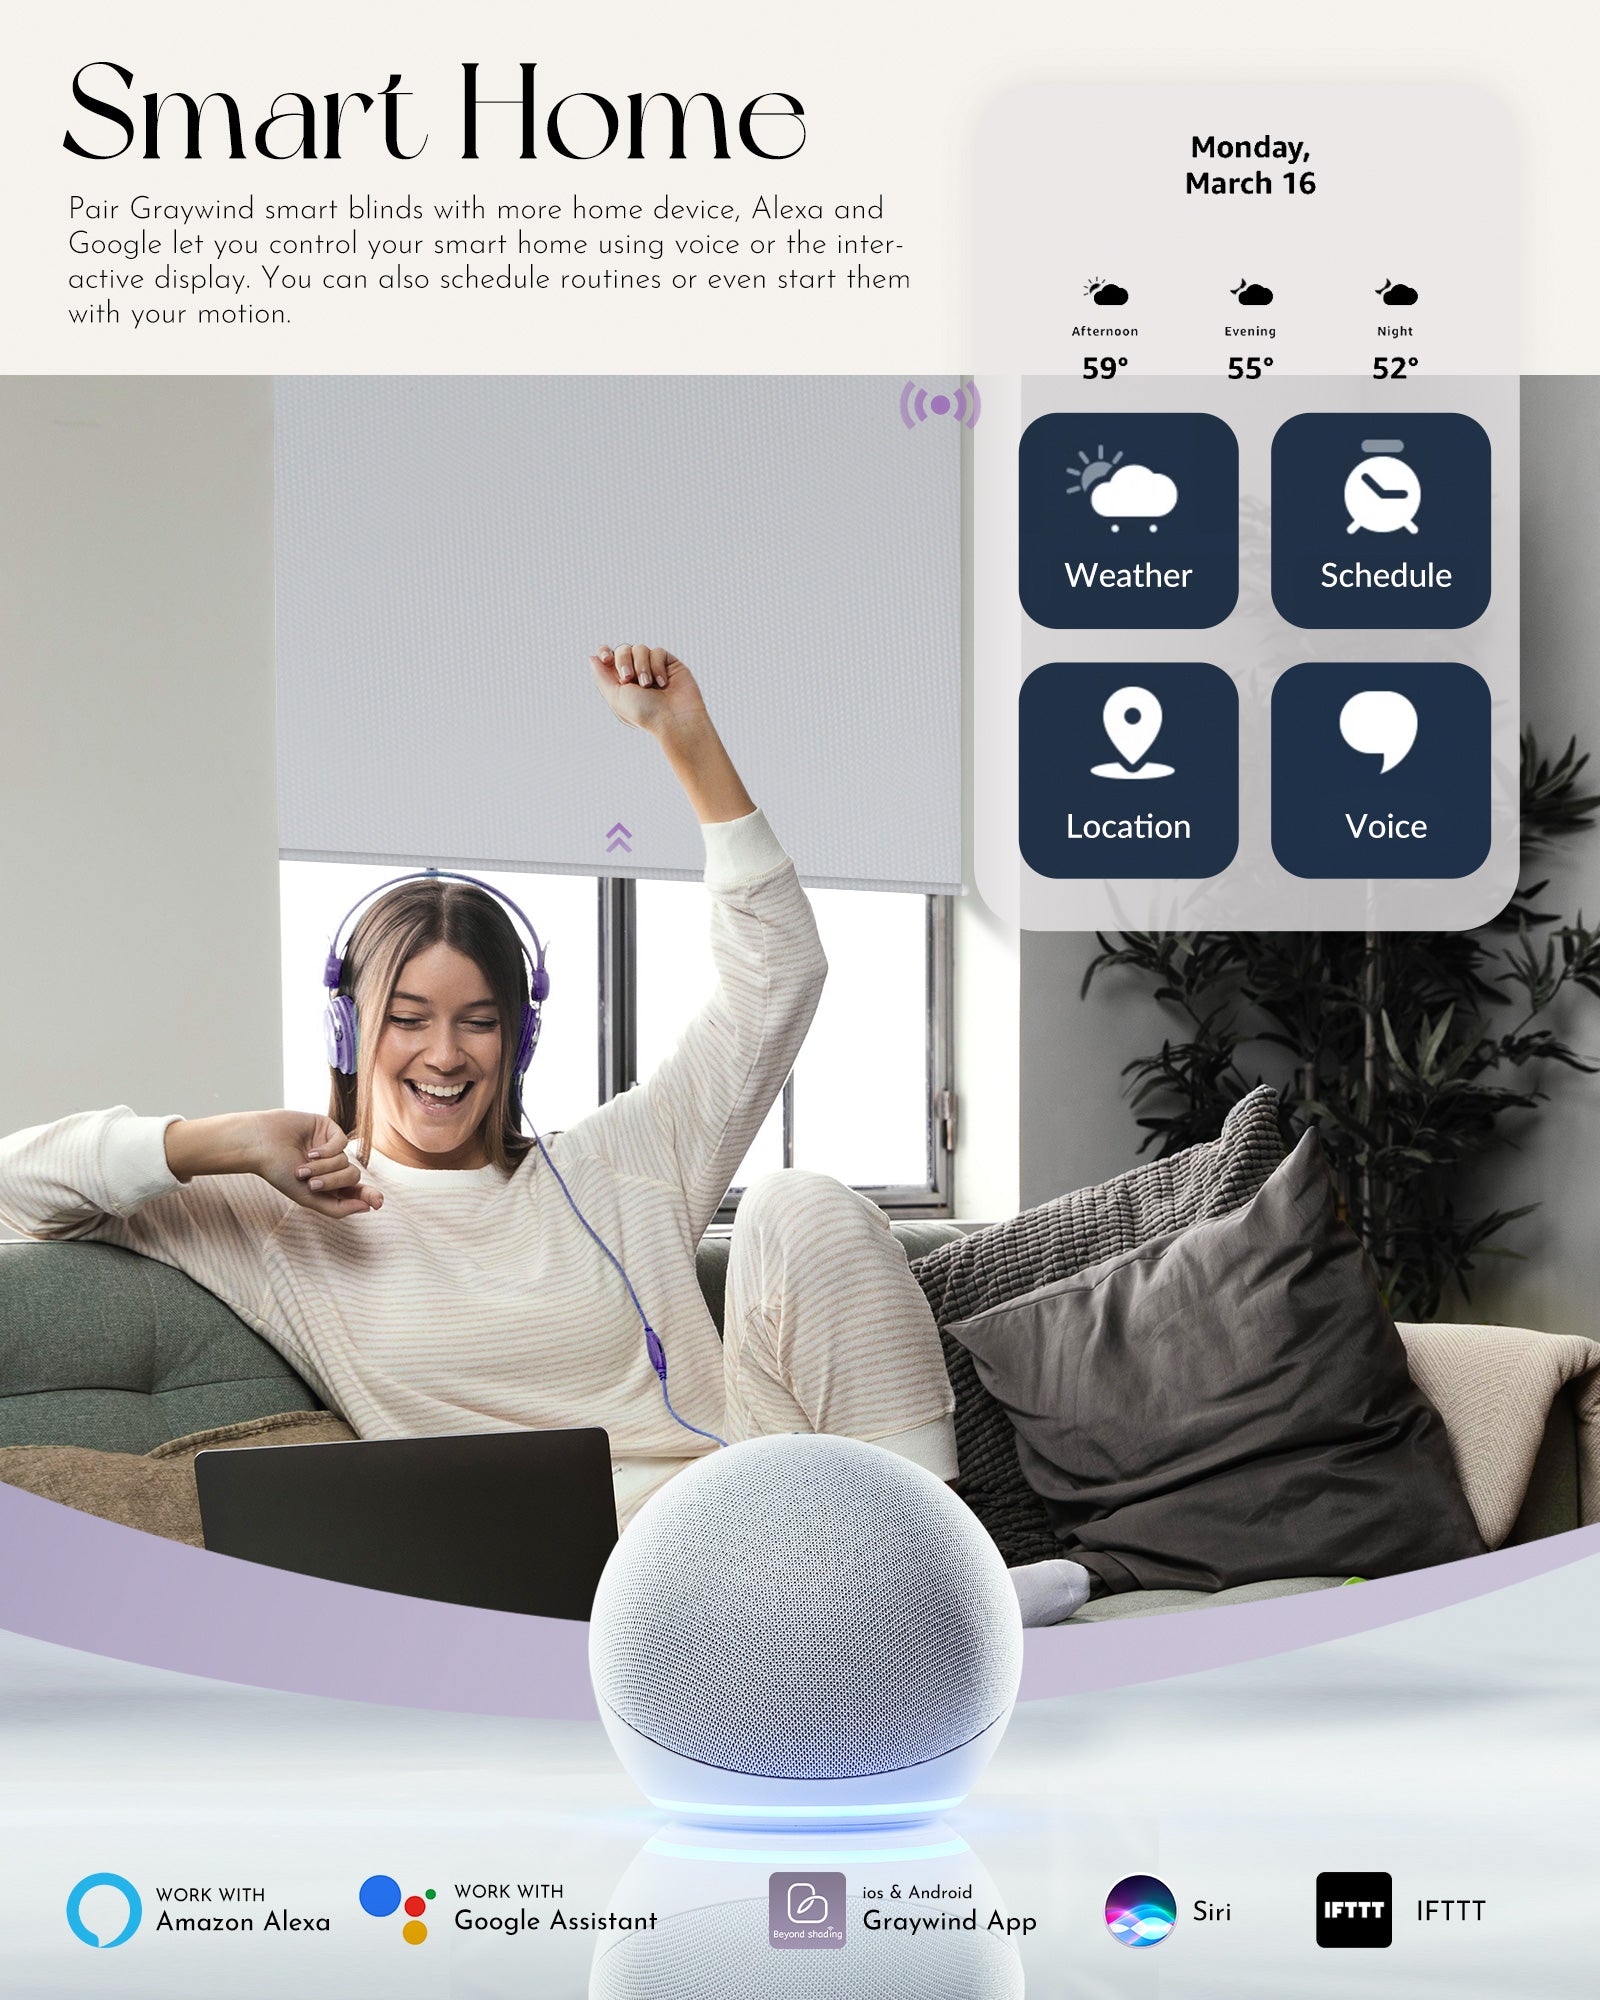 Pair Graywind smart blinds with more home device, Alexa and Google let you control your smart home using voice or the interactive display. You can also schedule routines or even start them with your motion.